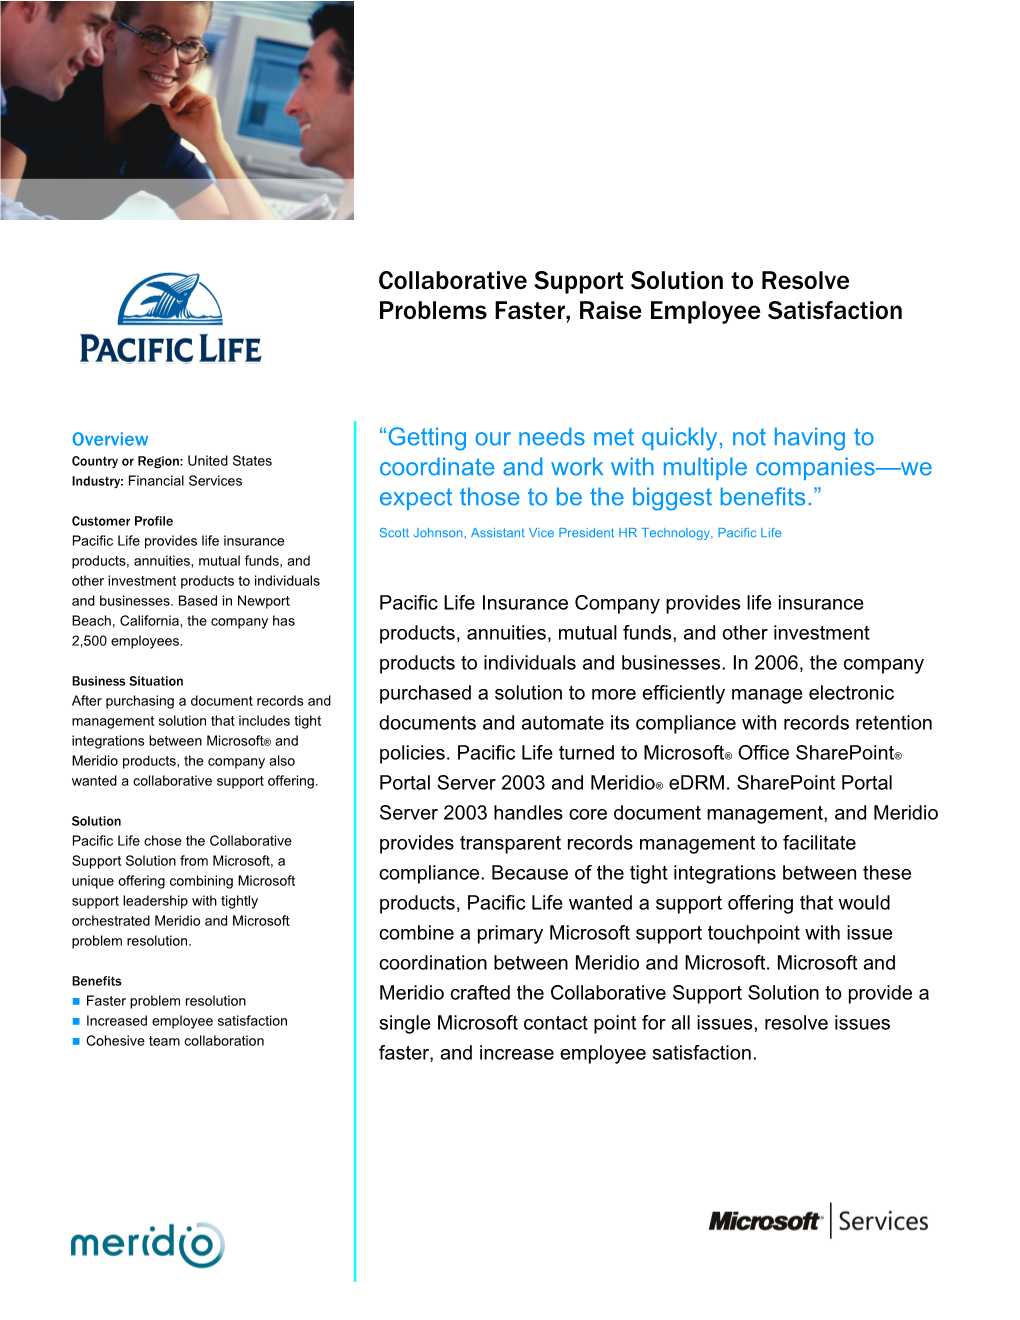 Collaborative Support Solution to Resolve Problems Faster, Raise Employee Satisfaction